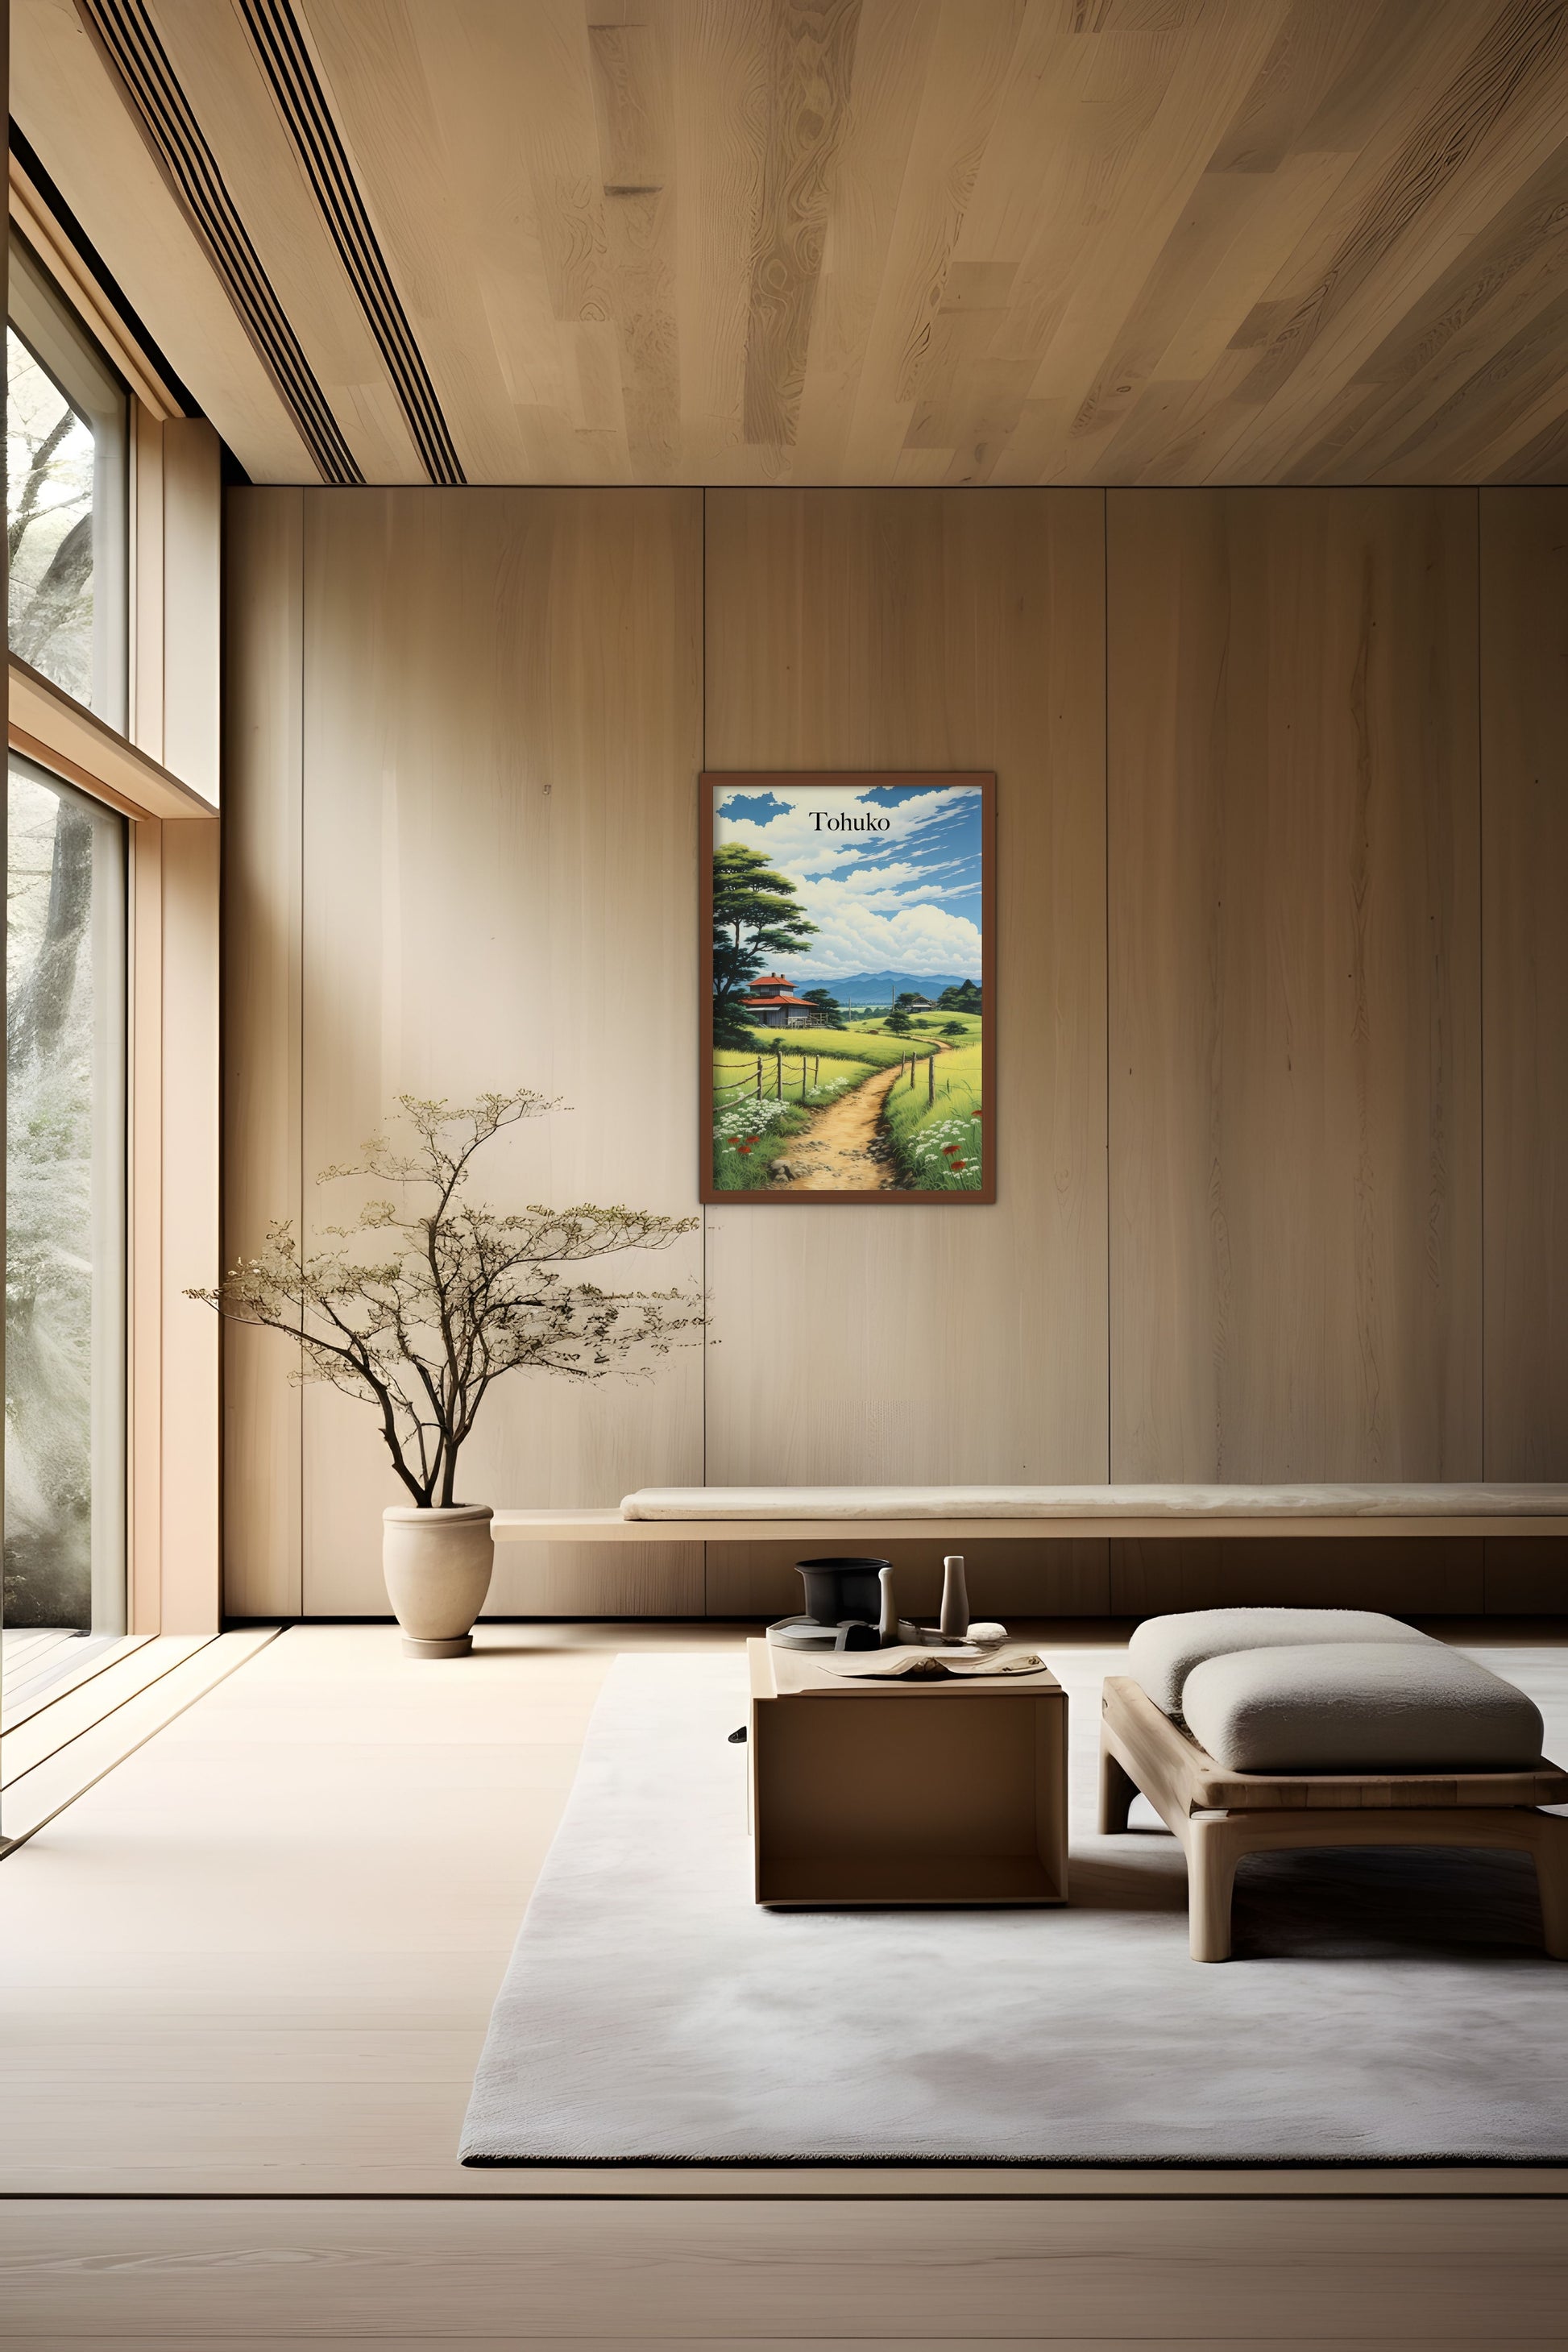 Minimalist living room with wooden walls, a framed painting, and a branch decor.